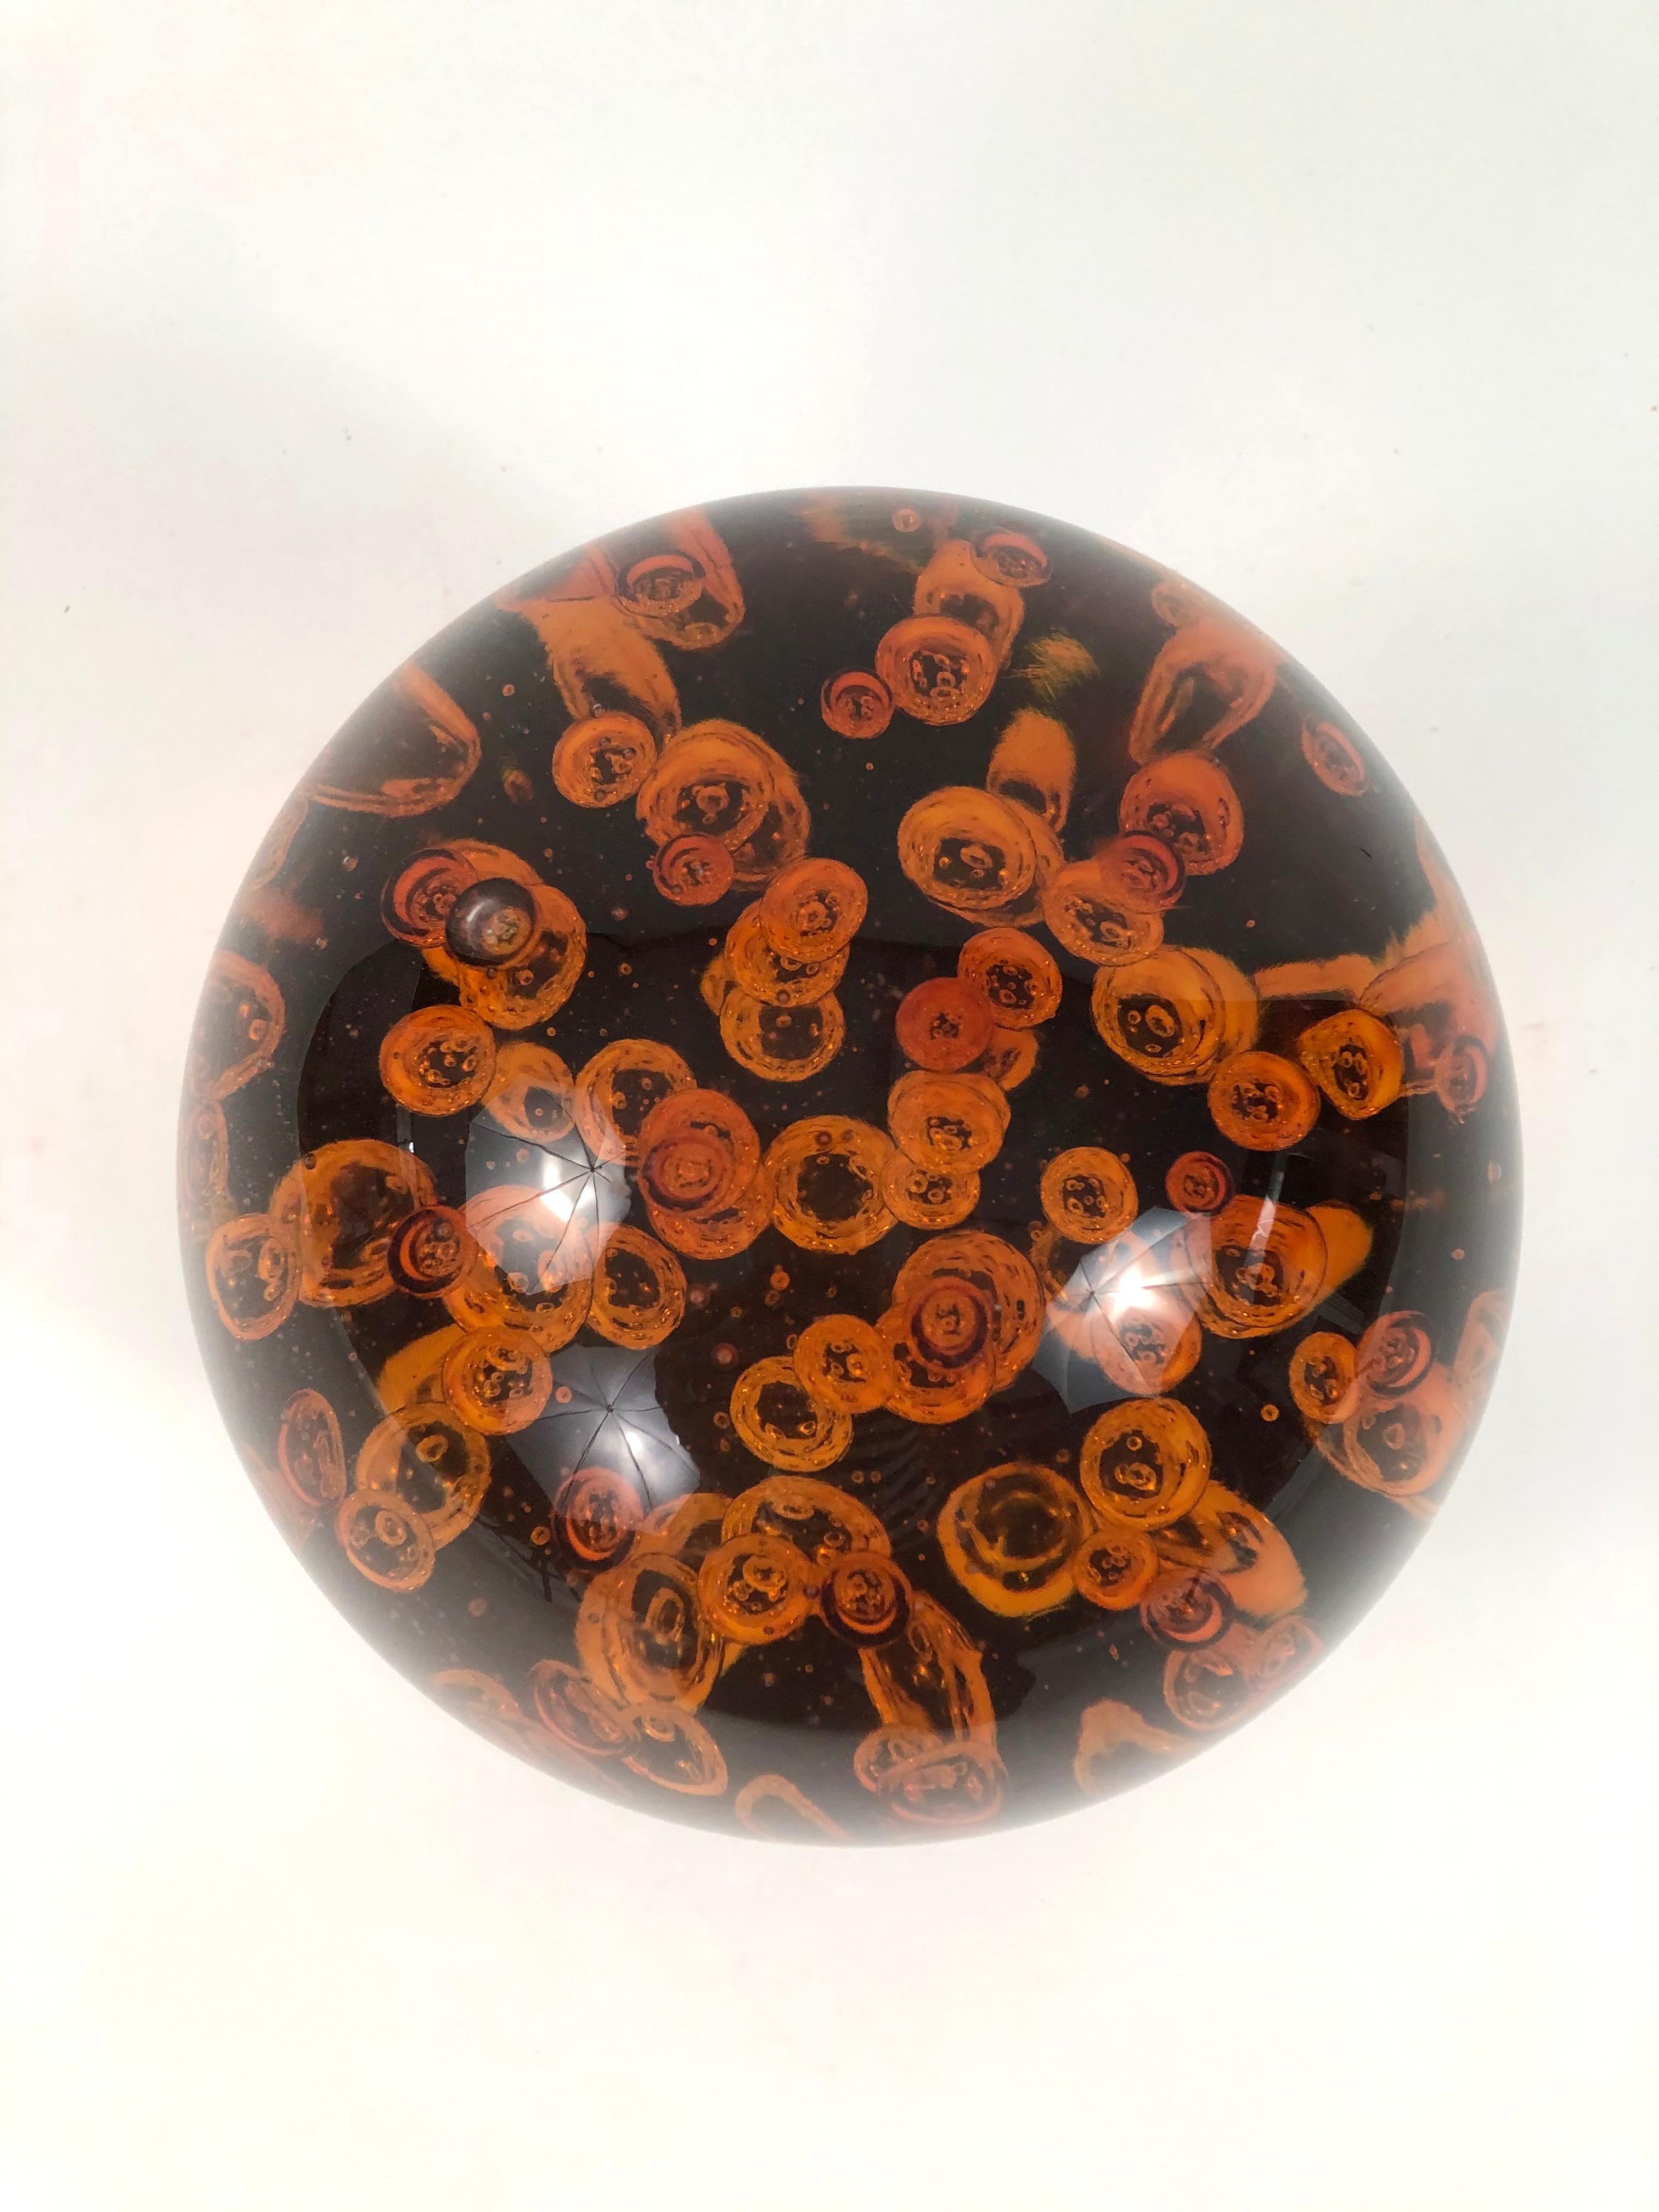 A large vintage amber blown glass sphere, with large bubbles inside, heavy weight and richly colored, resting on a slate (?) veneered square stand. Wonderful table decoration or doorstop. Heavy weight and rich color.

Measures: Height on stand